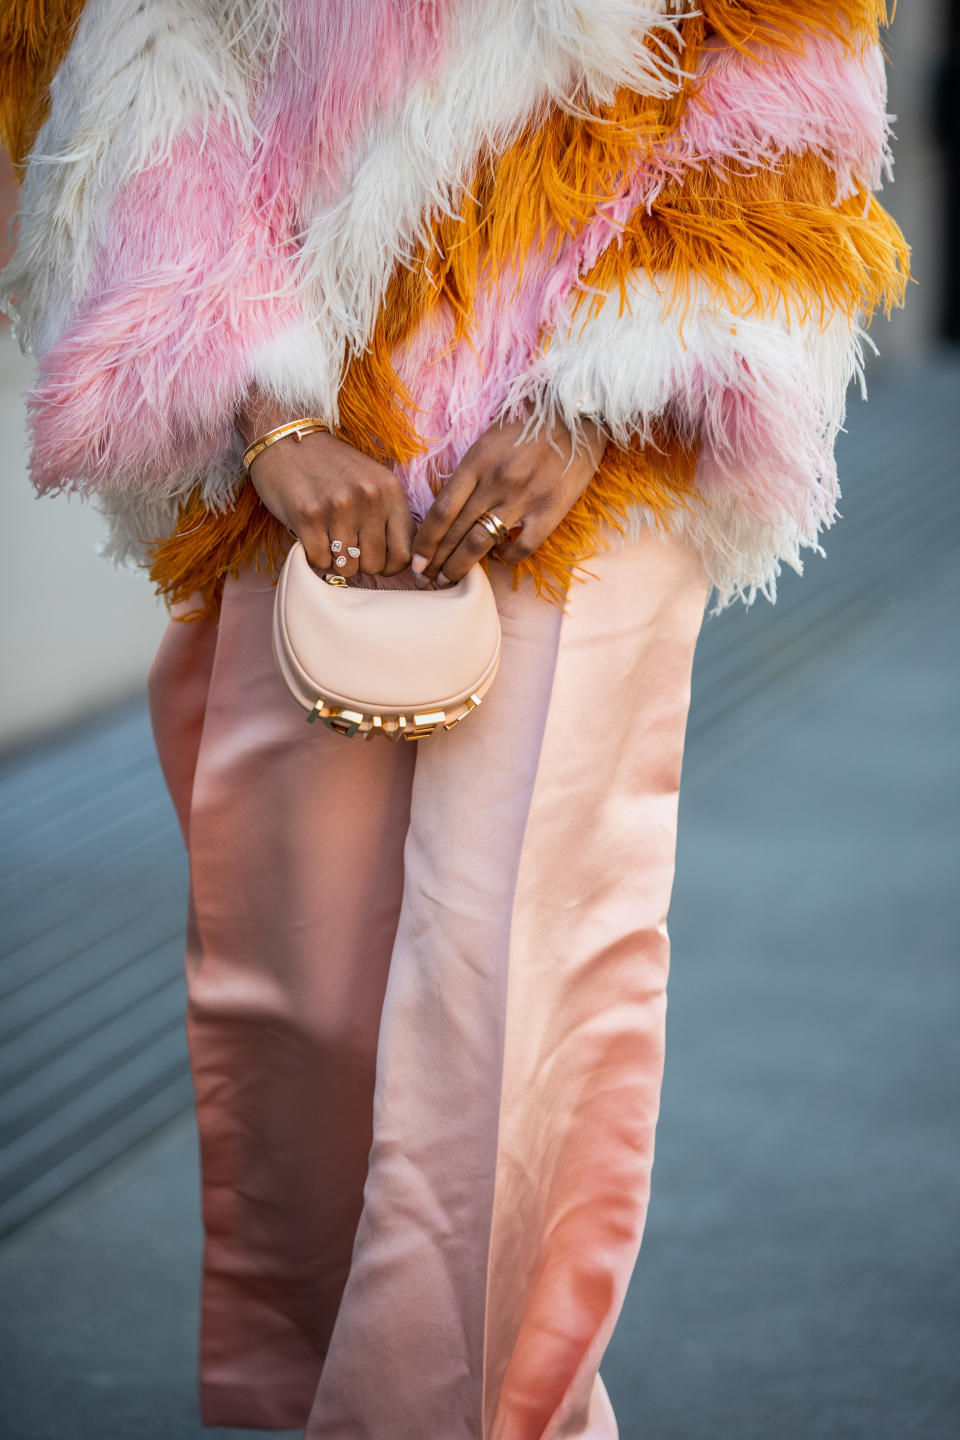 MILAN, ITALY - FEBRUARY 23: Didi Stone seen wearing striped rose, orange, white fur jacket, micro bag, wide leg pink bag, heels outside of Fendi fashion show during the Milan Fashion Week Fall/Winter 2022/2023 on February 23, 2022 in Milan, Italy. (Photo by Christian Vierig/Getty Images)